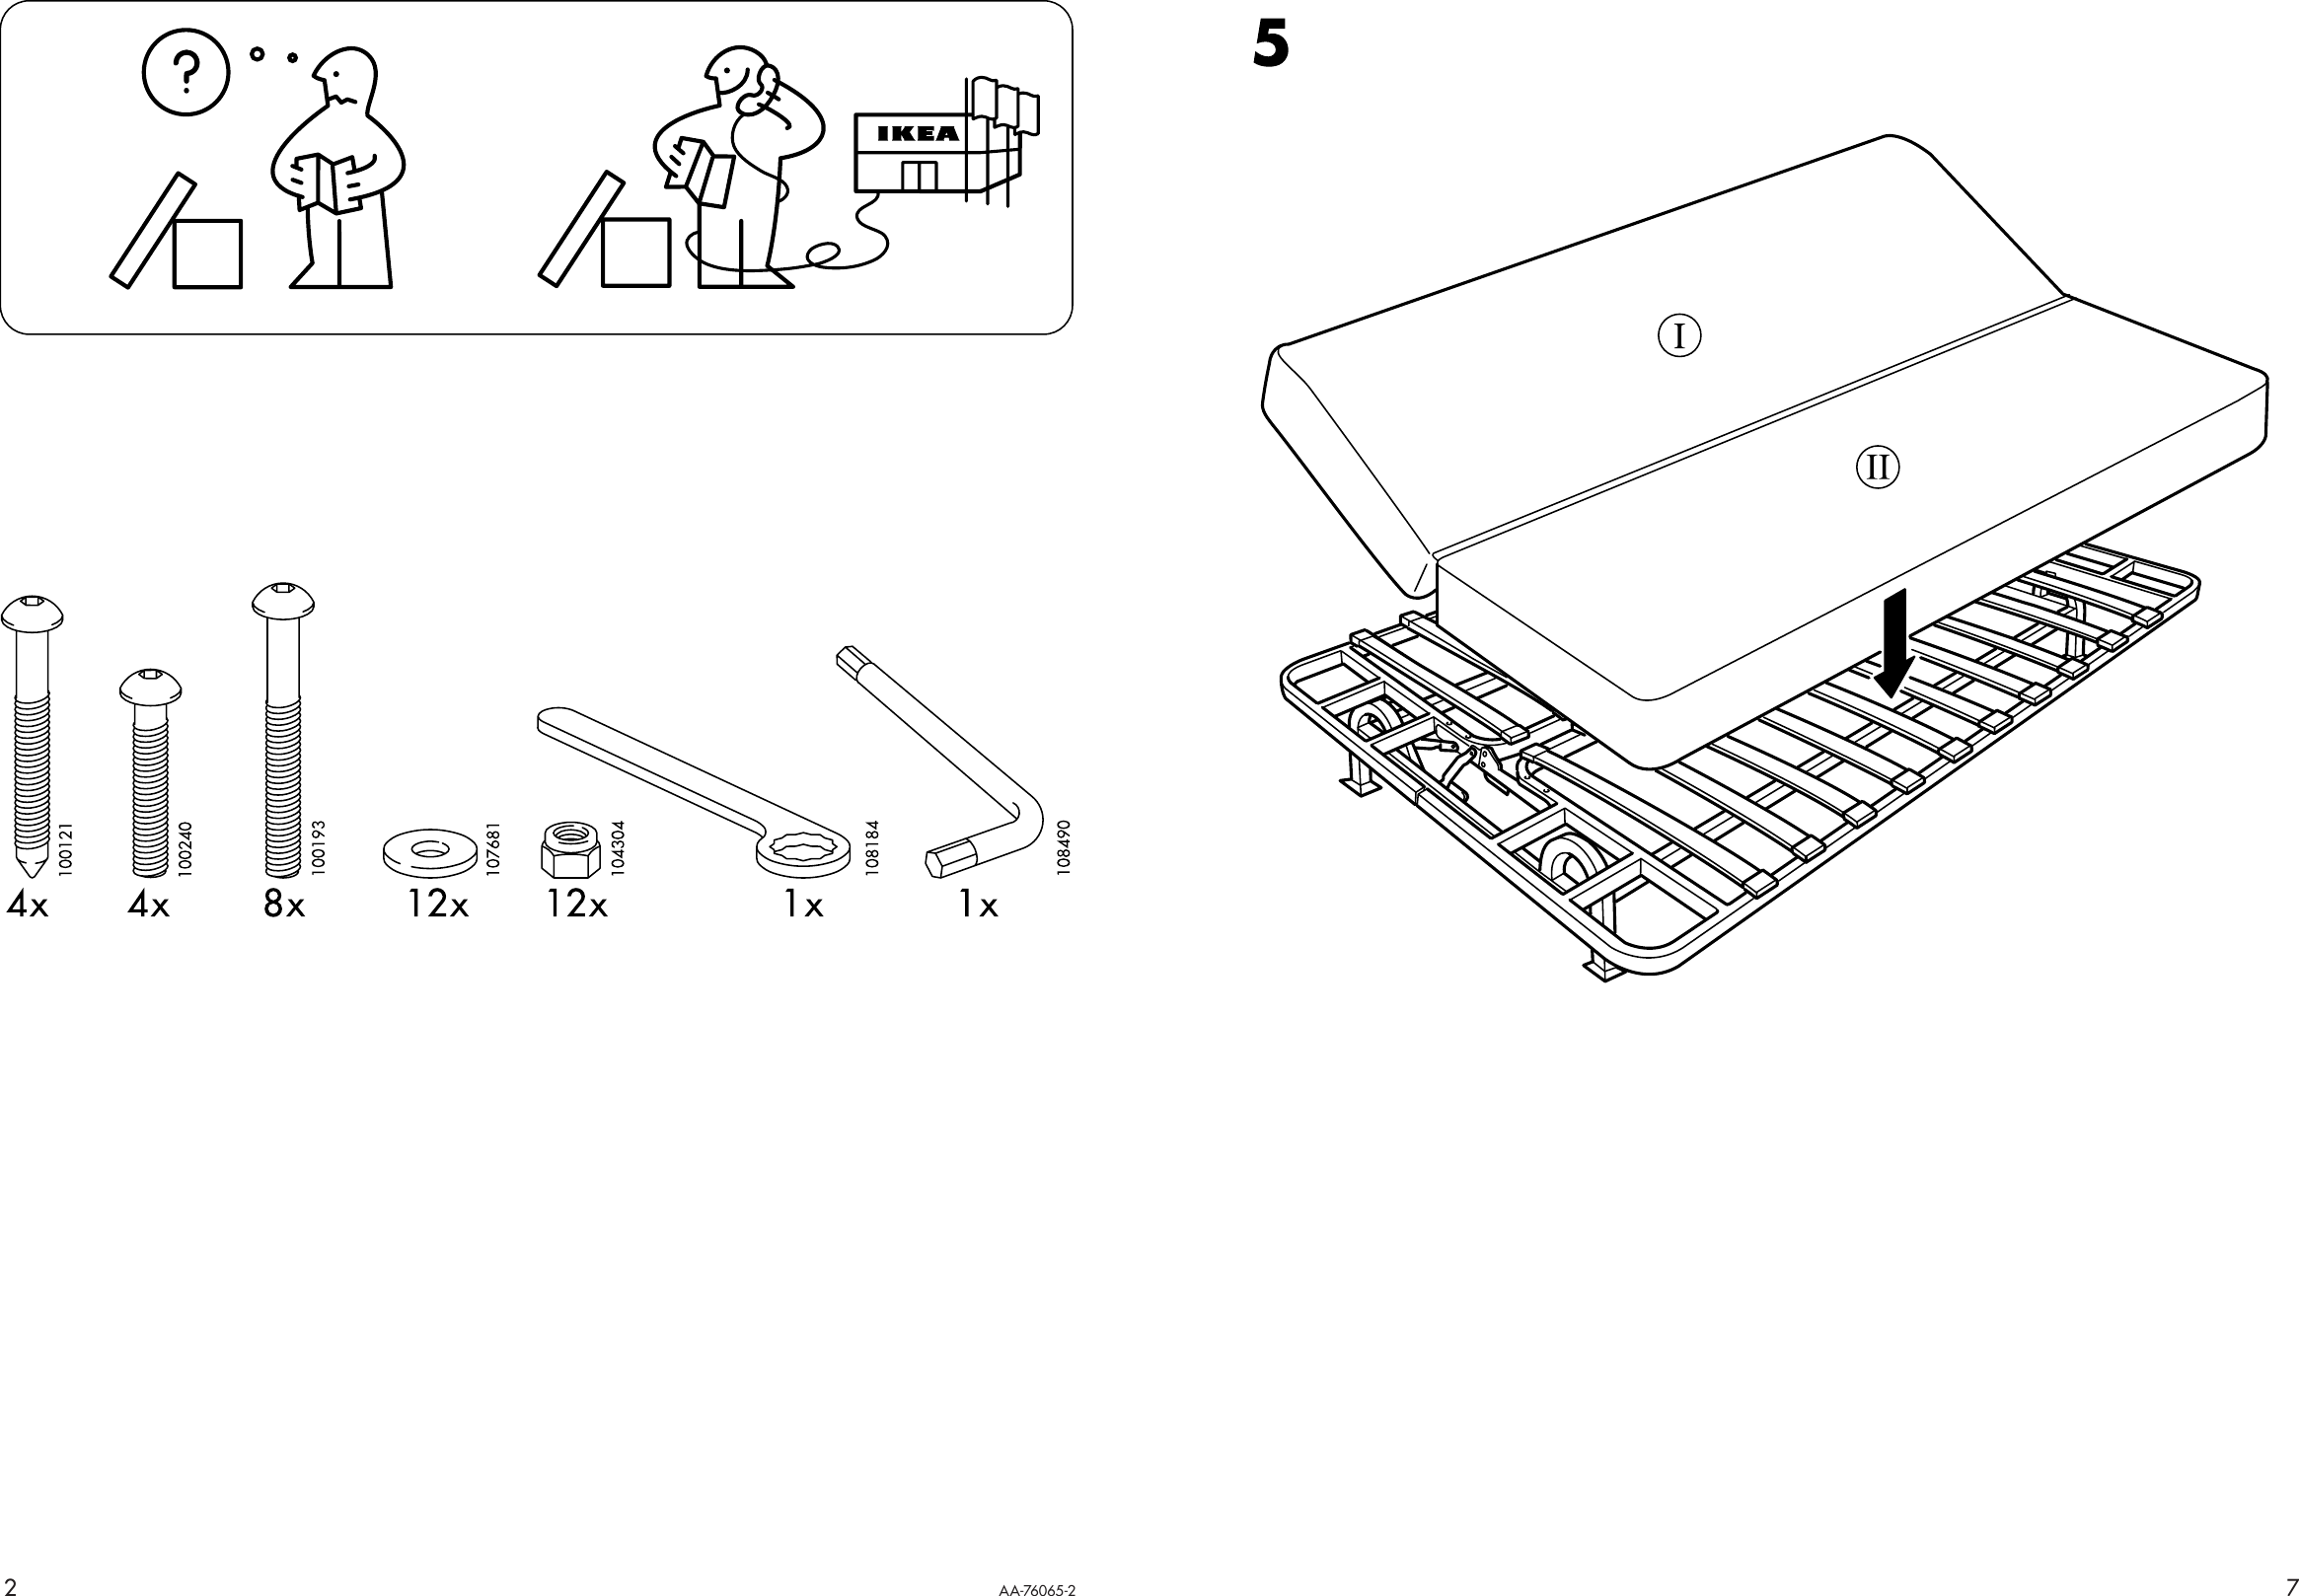 Page 2 of 4 - Ikea Ikea-Exarby-Sofa-Bed-Frame-Assembly-Instruction-3  Ikea-exarby-sofa-bed-frame-assembly-instruction